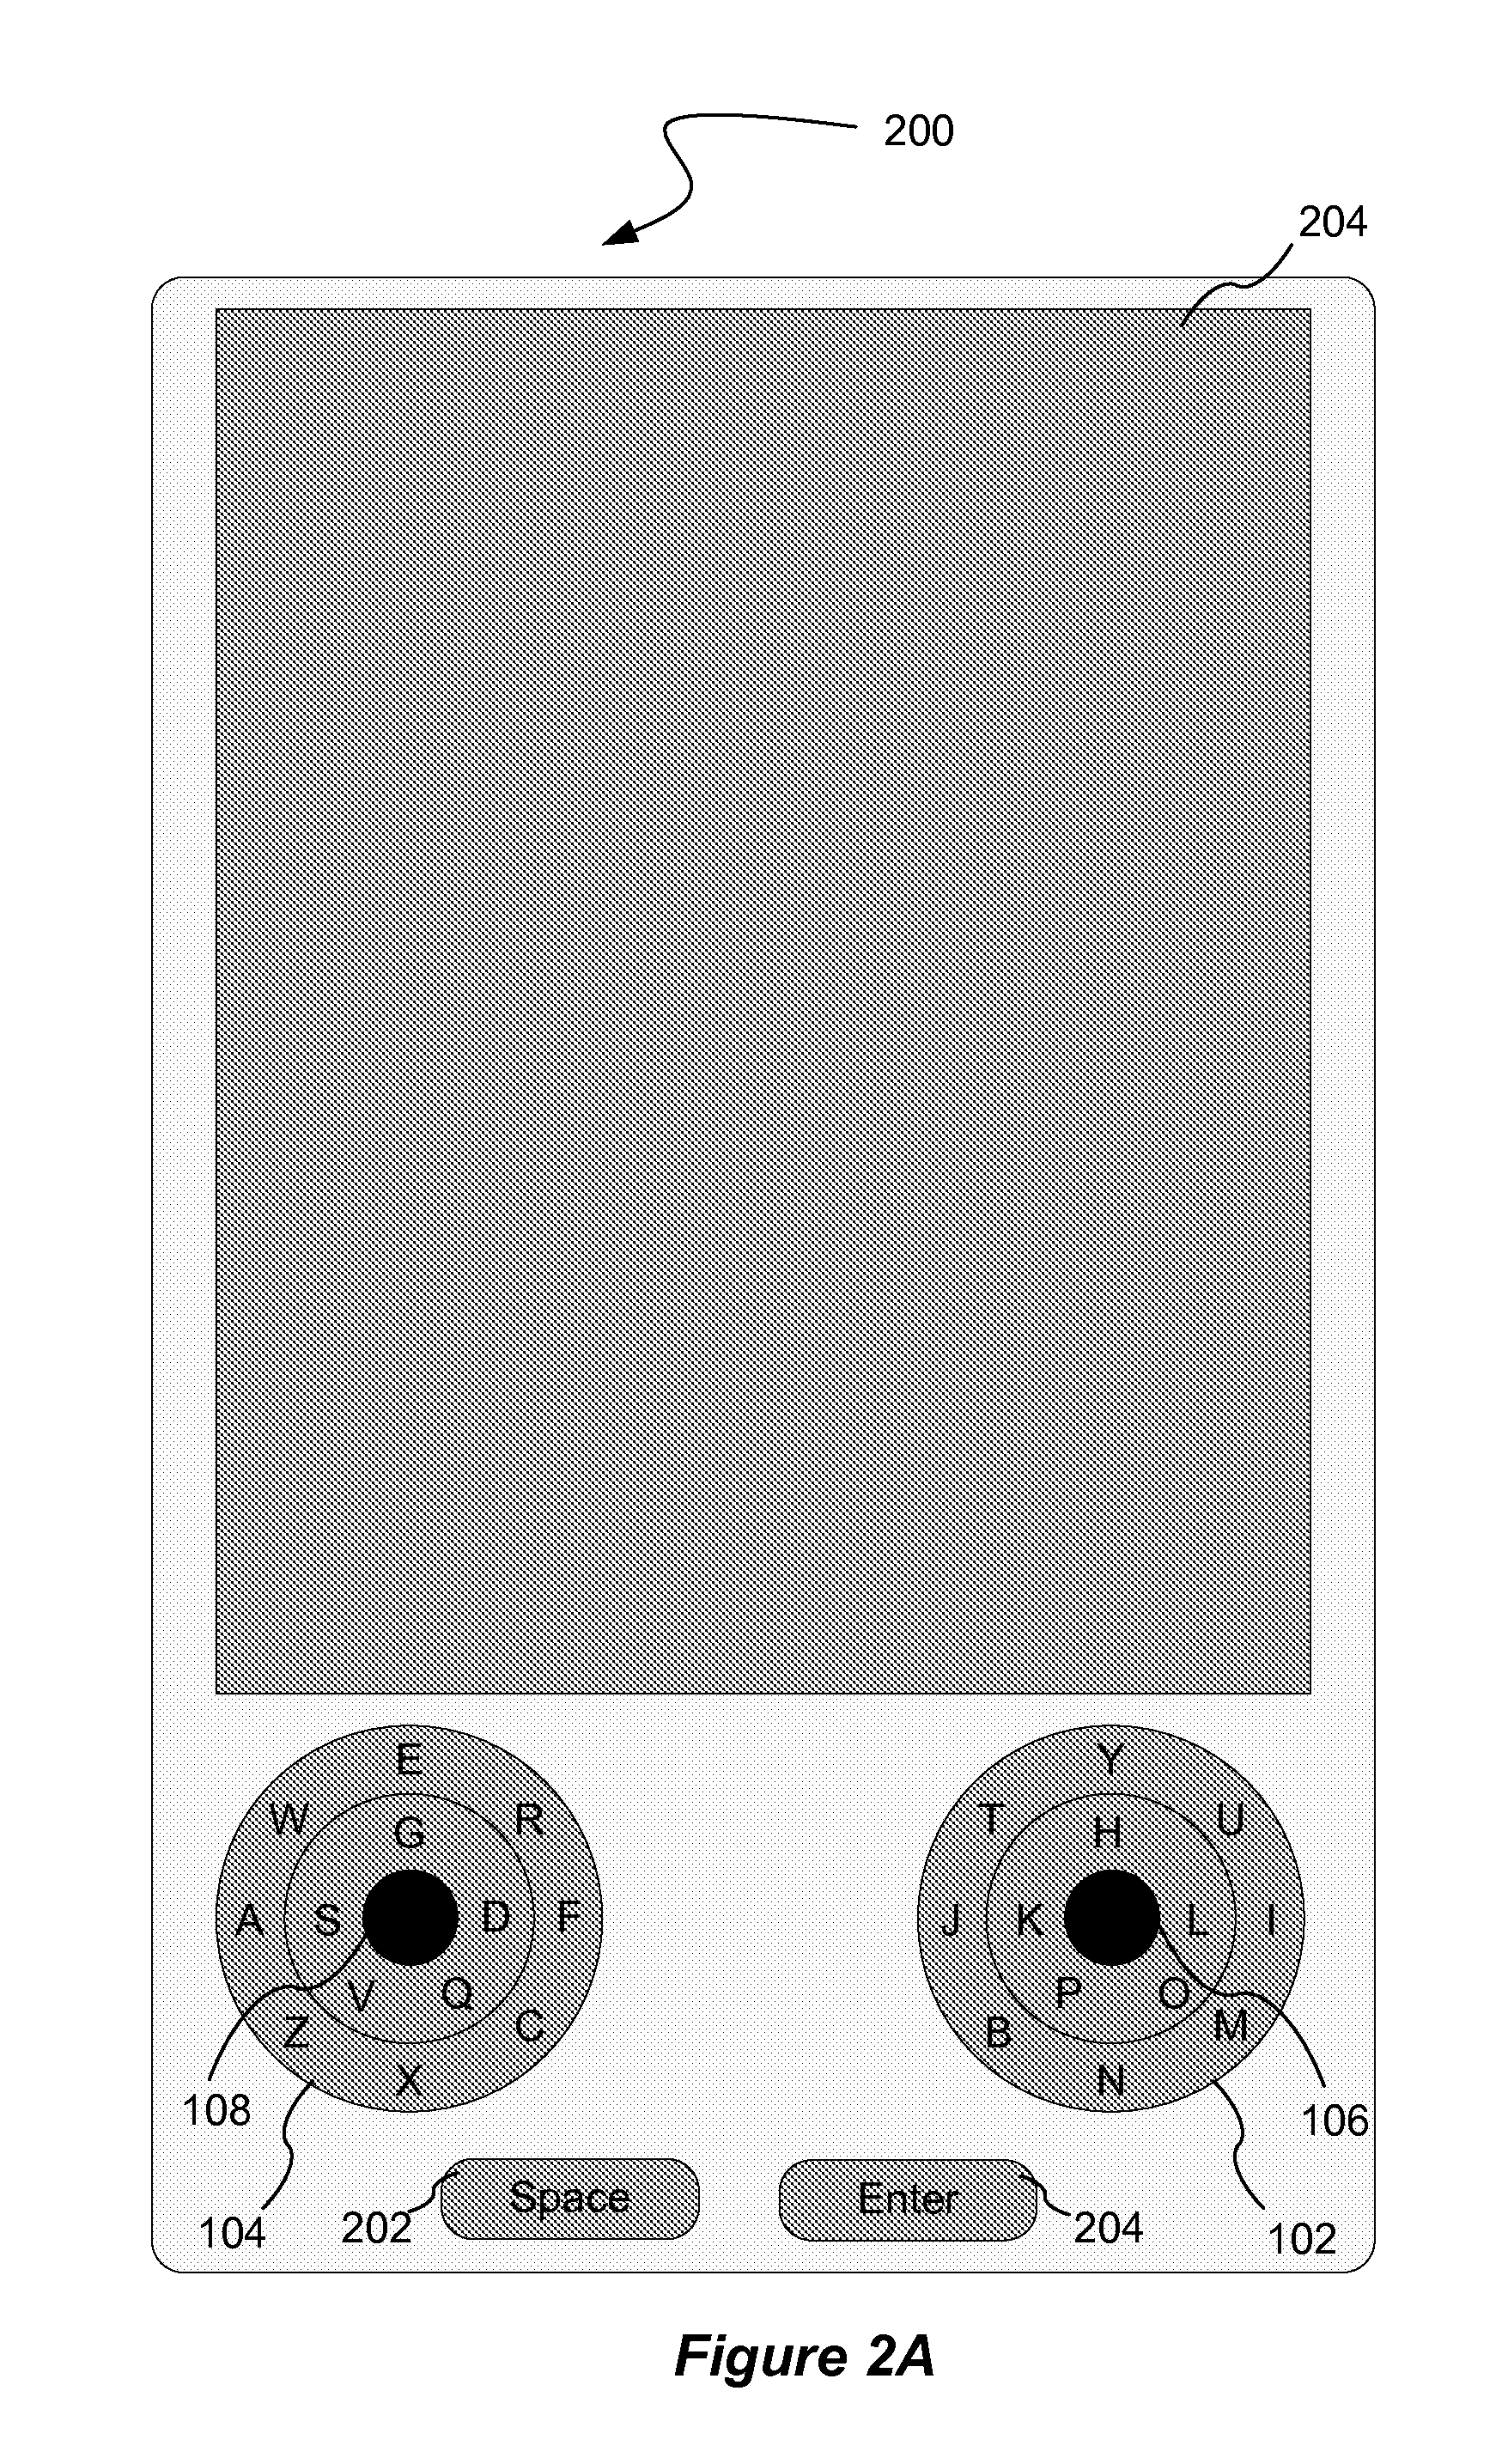 Dual touch pad interface for a computing device